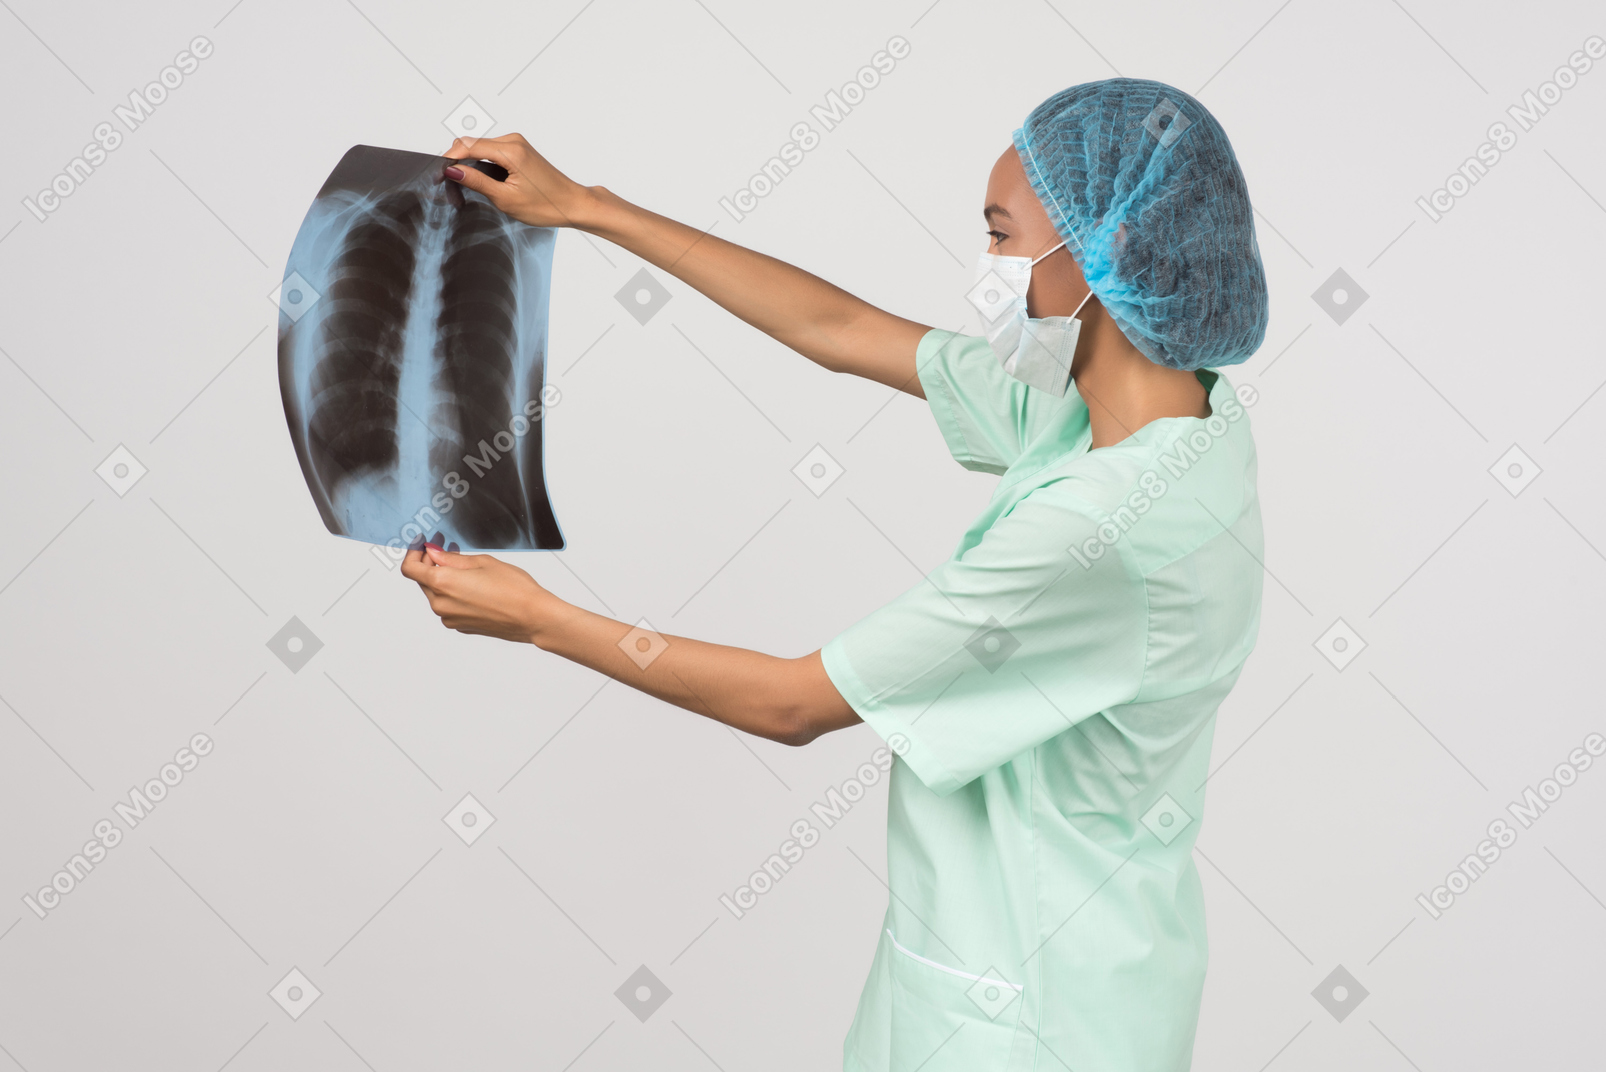 Examing patient's lungs scan